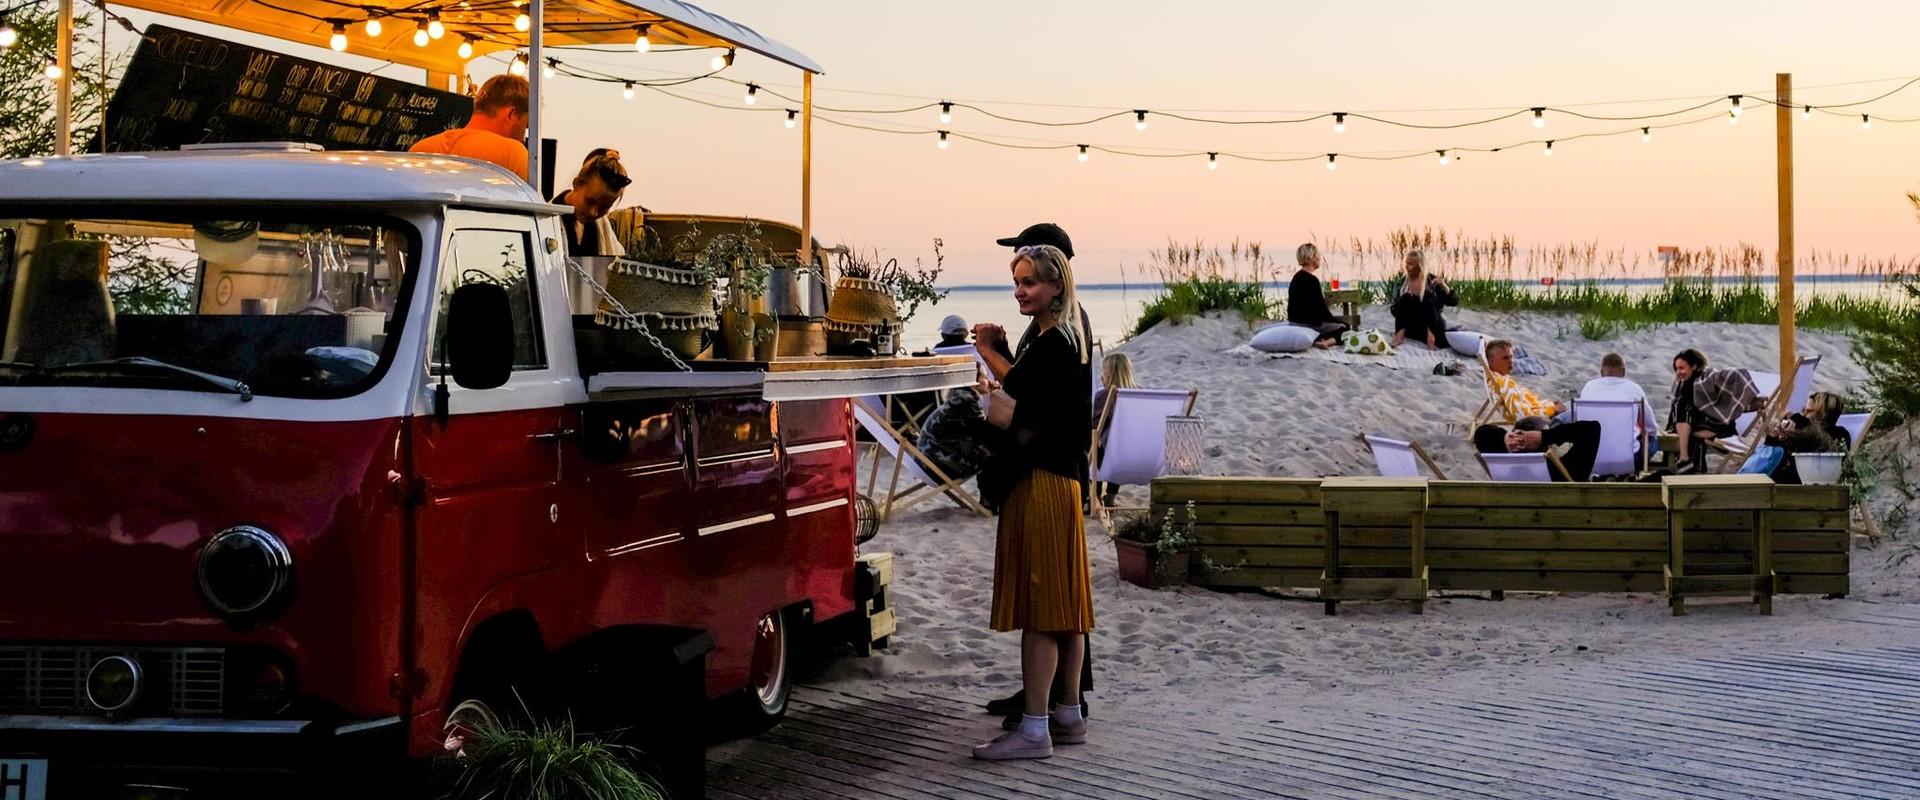 There is a cosy beach bar where you can enjoy life and watch the summer go by. Põks Bar was built in a 1988 Soviet-era hiking bus and it has a relaxin